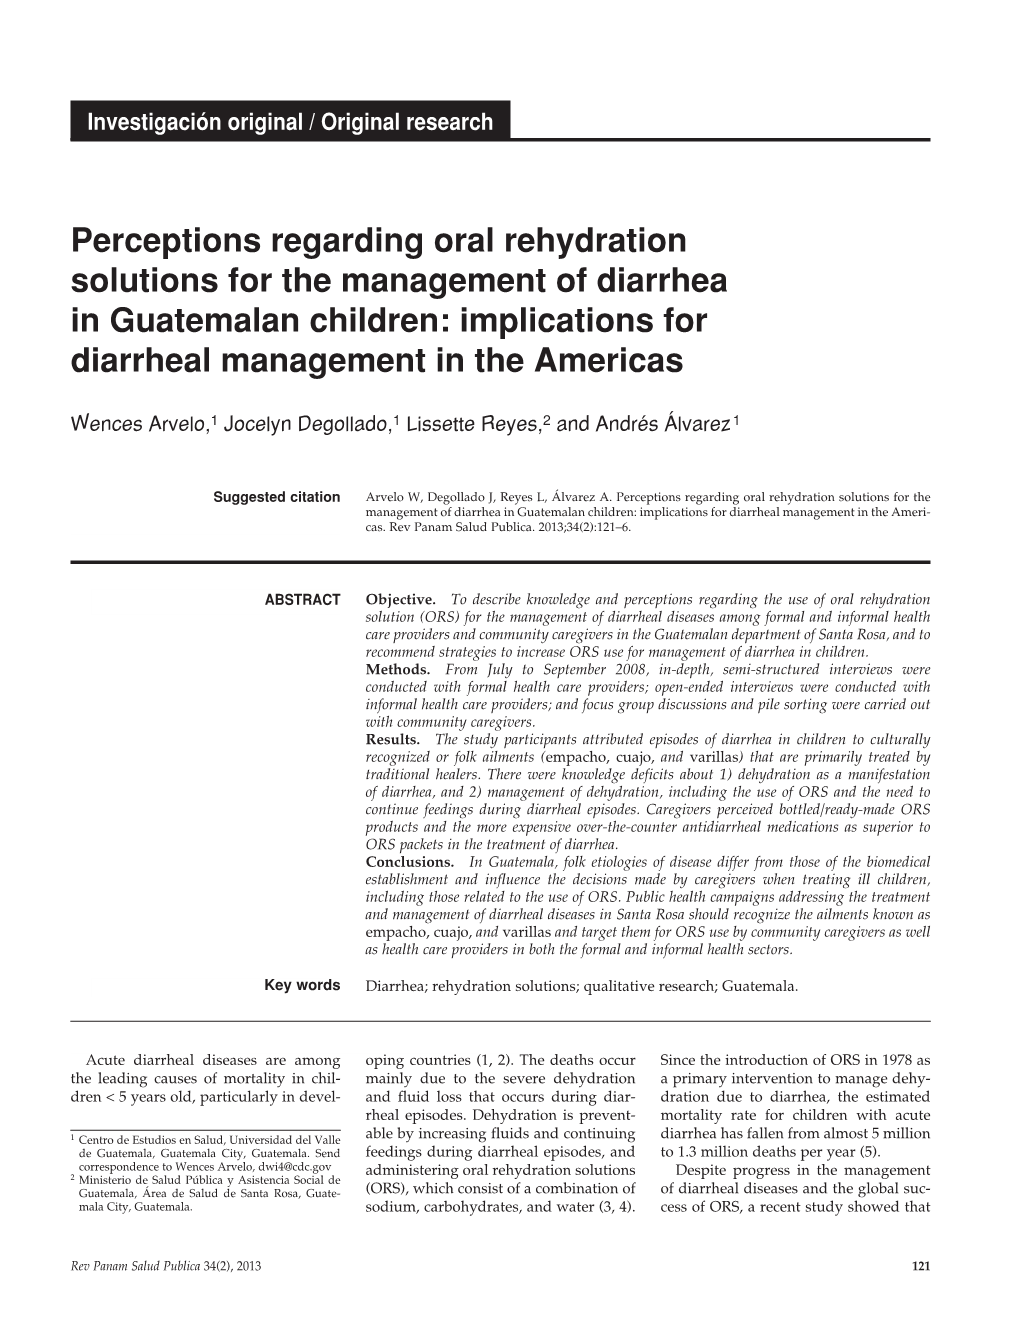 Perceptions Regarding Oral Rehydration Solutions for the Management of Diarrhea in Guatemalan Children: Implications for Diarrheal Management in the Americas